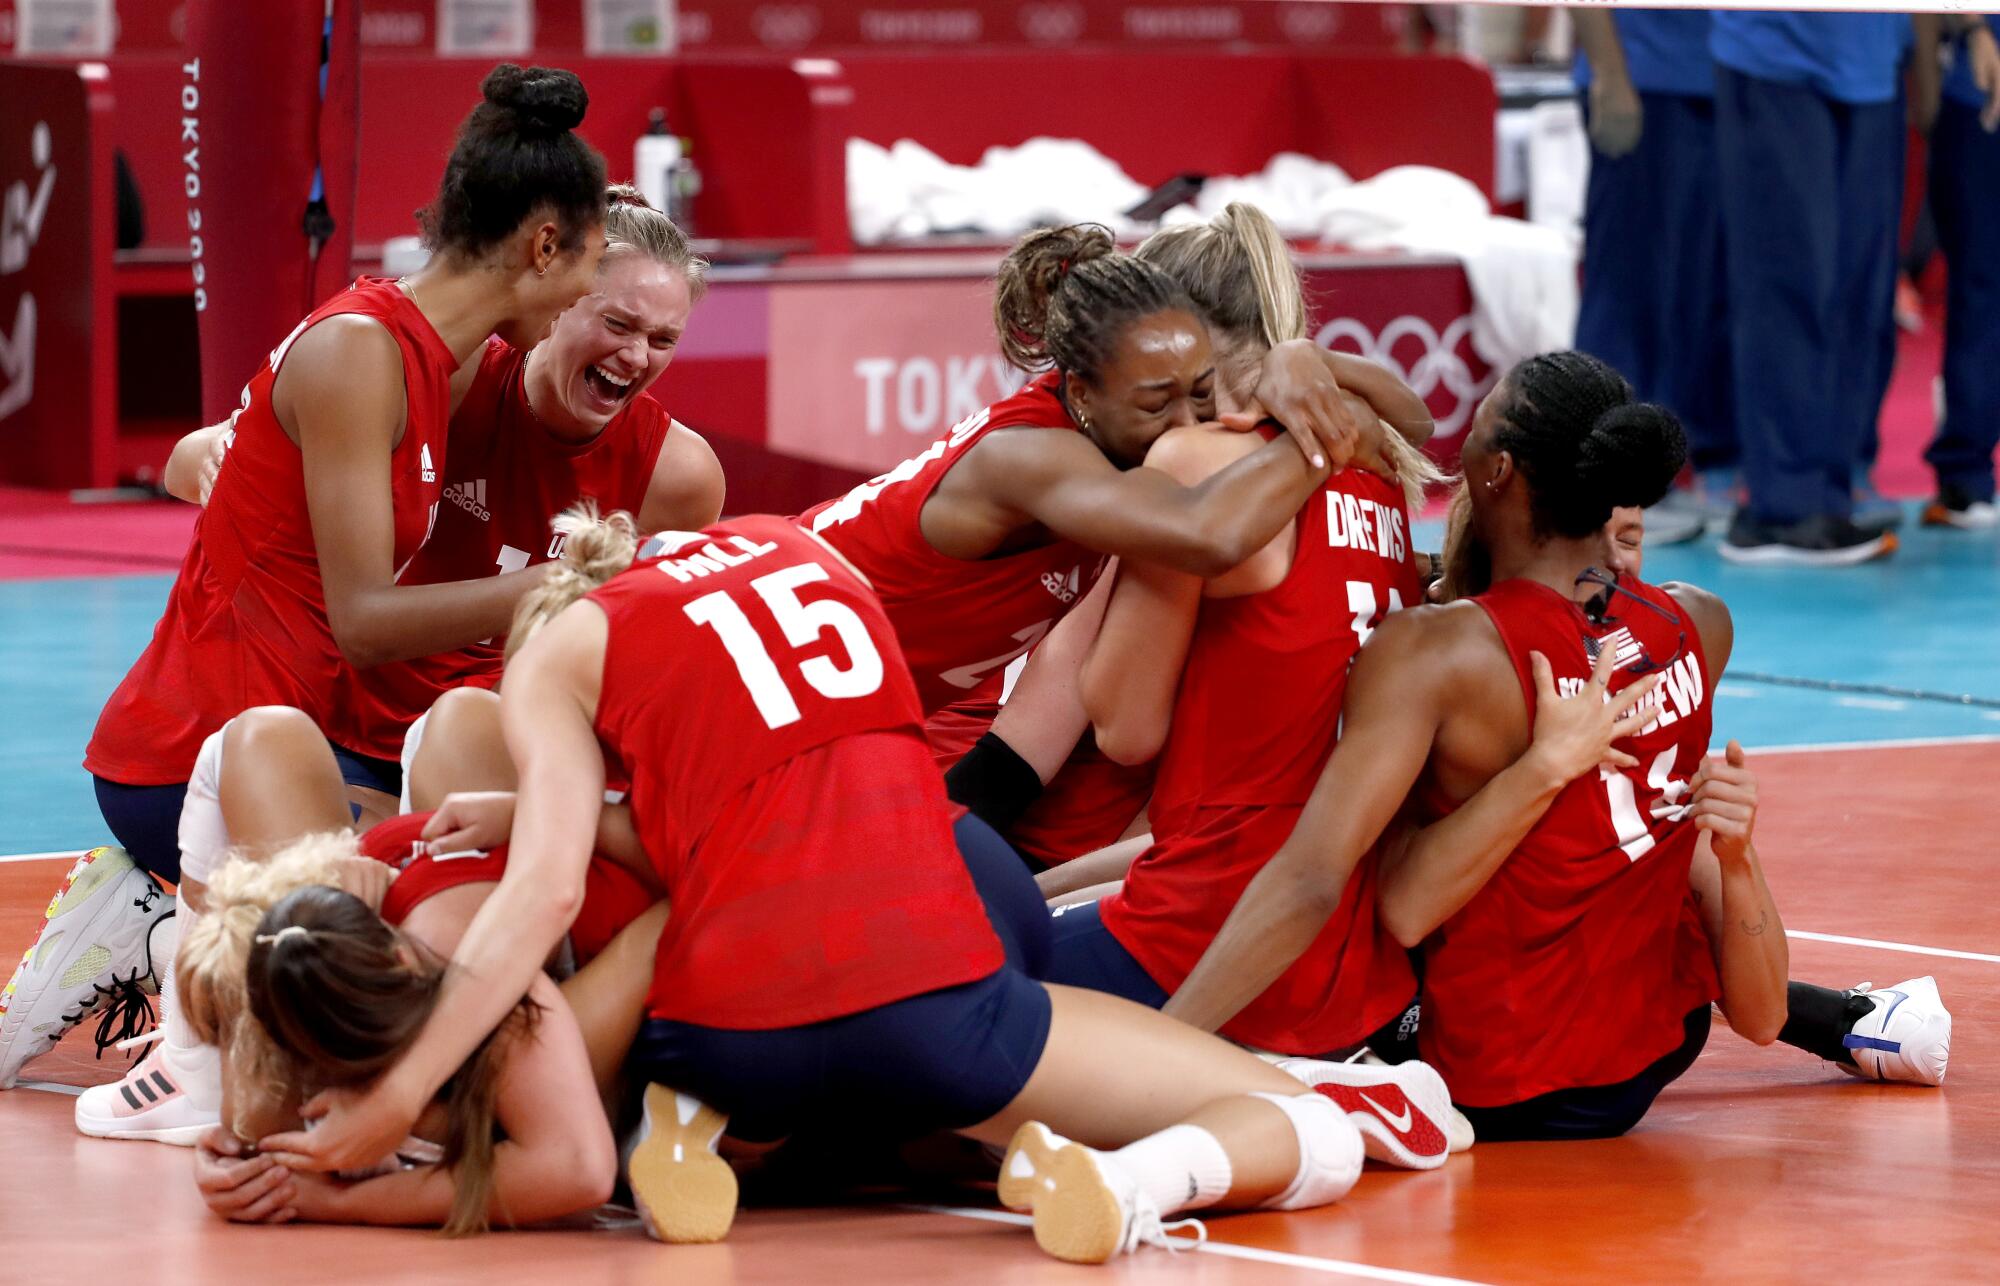 Smiling women form a heap on the floor of an indoor volleyball court.